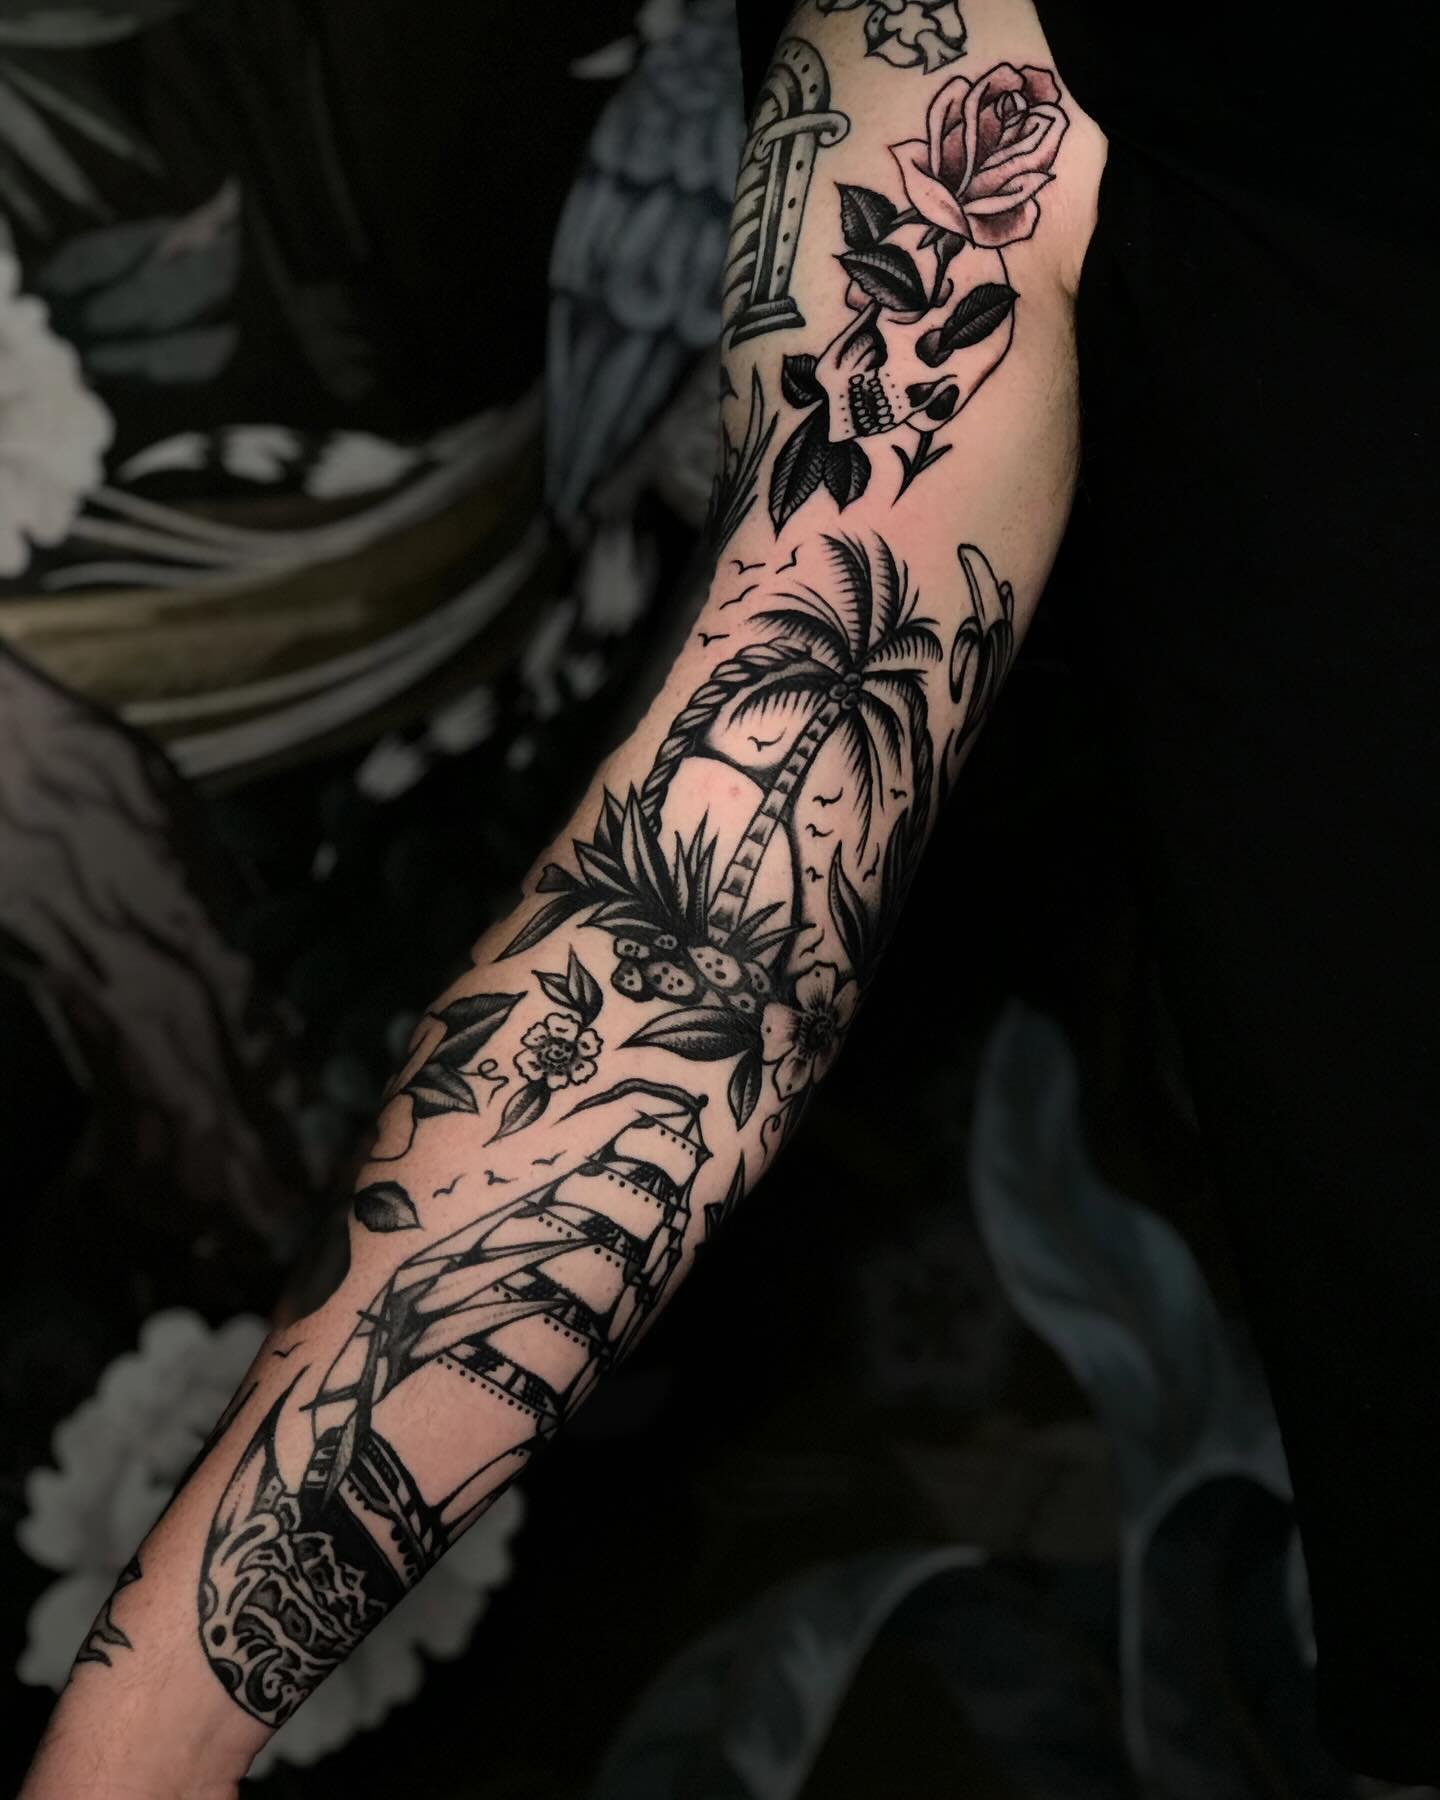 Completed sleeve and the start of the next one for one of the best people I know @itstheflux @thatsheapsgood thank you brother it&rsquo;s been so much fun! @mans_ruin_tattoo